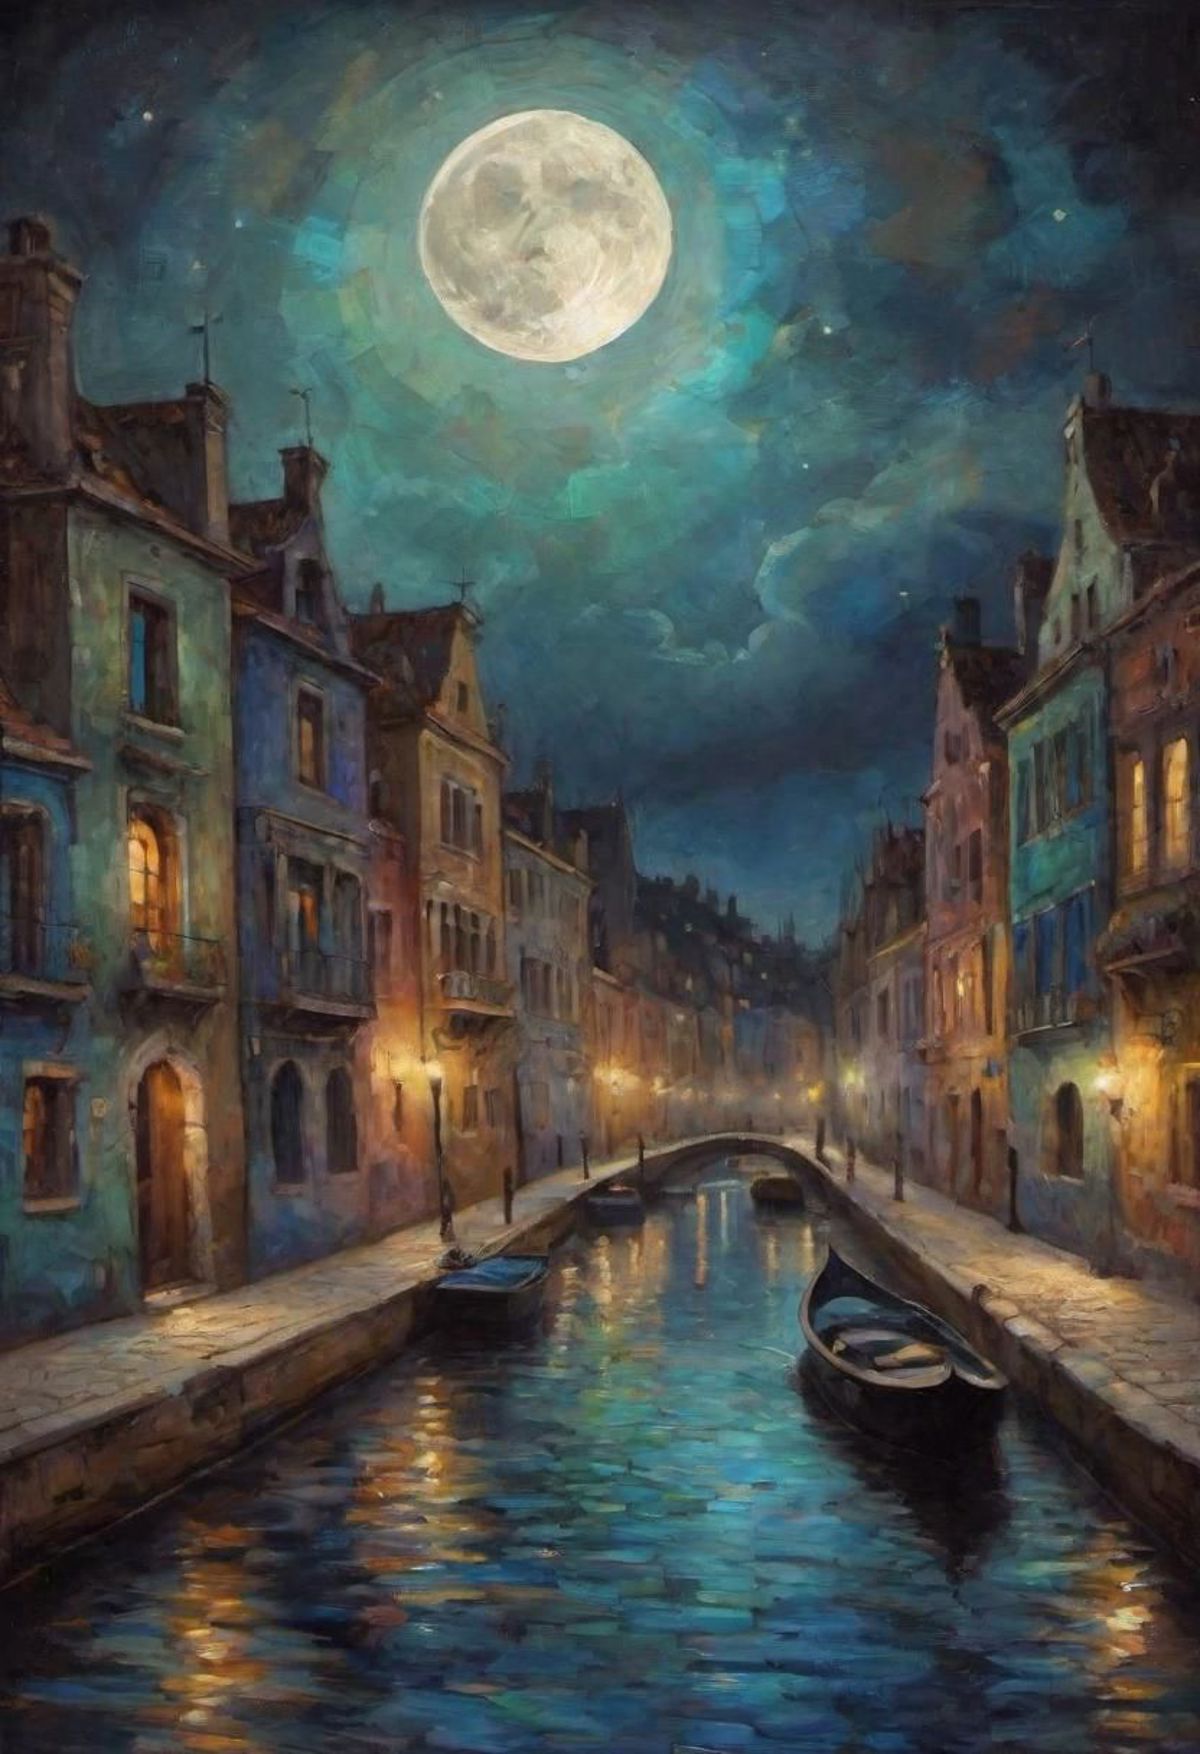 A painting of a city at night with a moonlit river and boats.